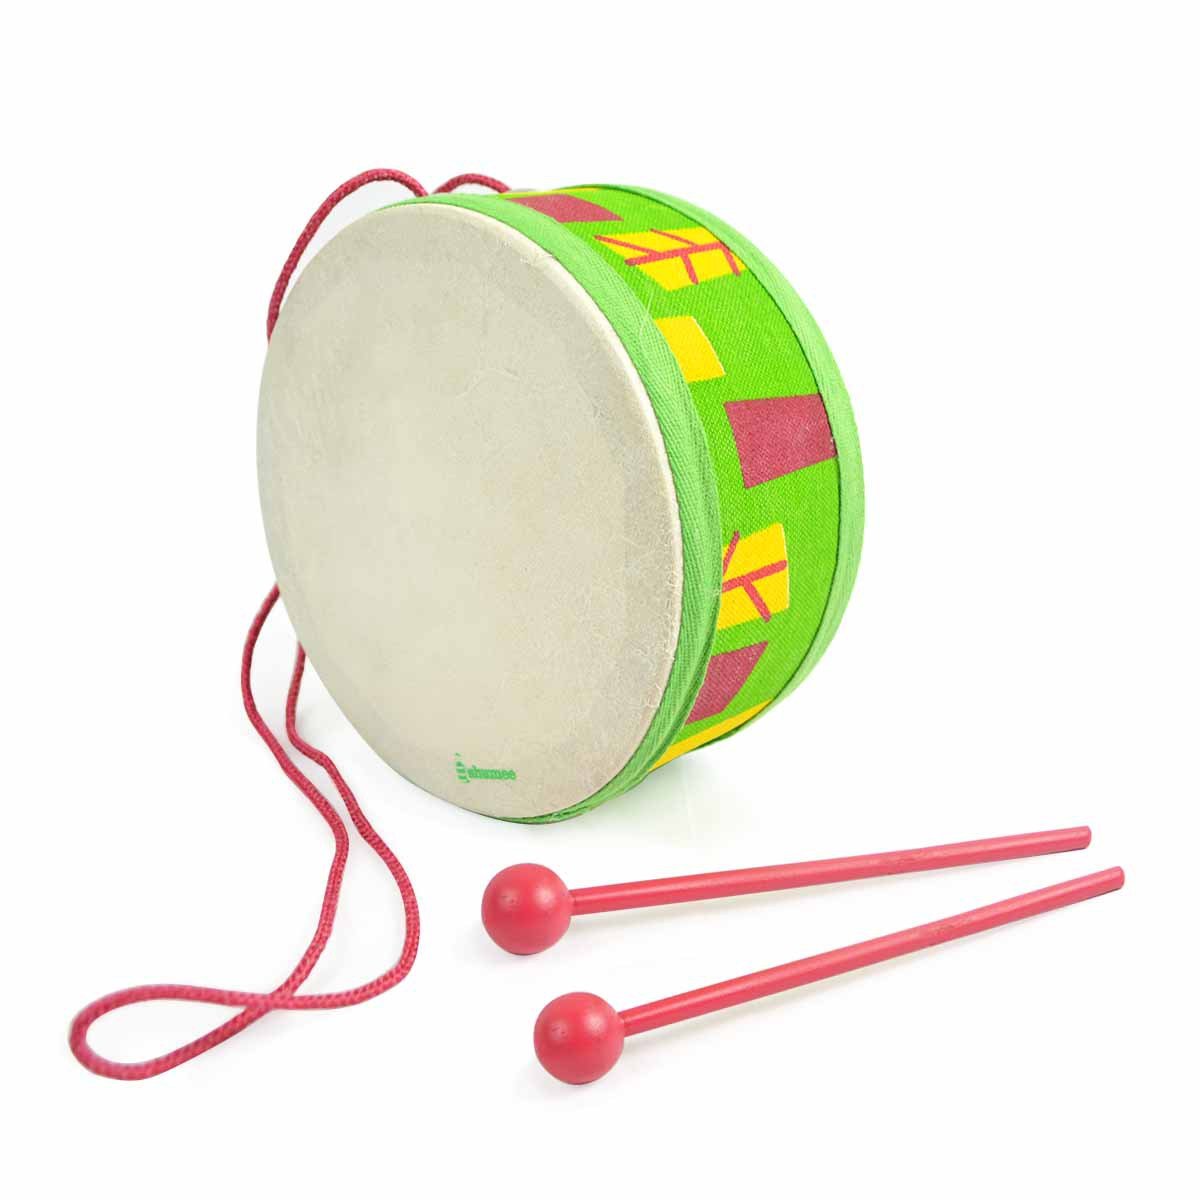 Shumee Wooden Jungle Drum - DTM-IN-WD-DRUM-3YRS-0169